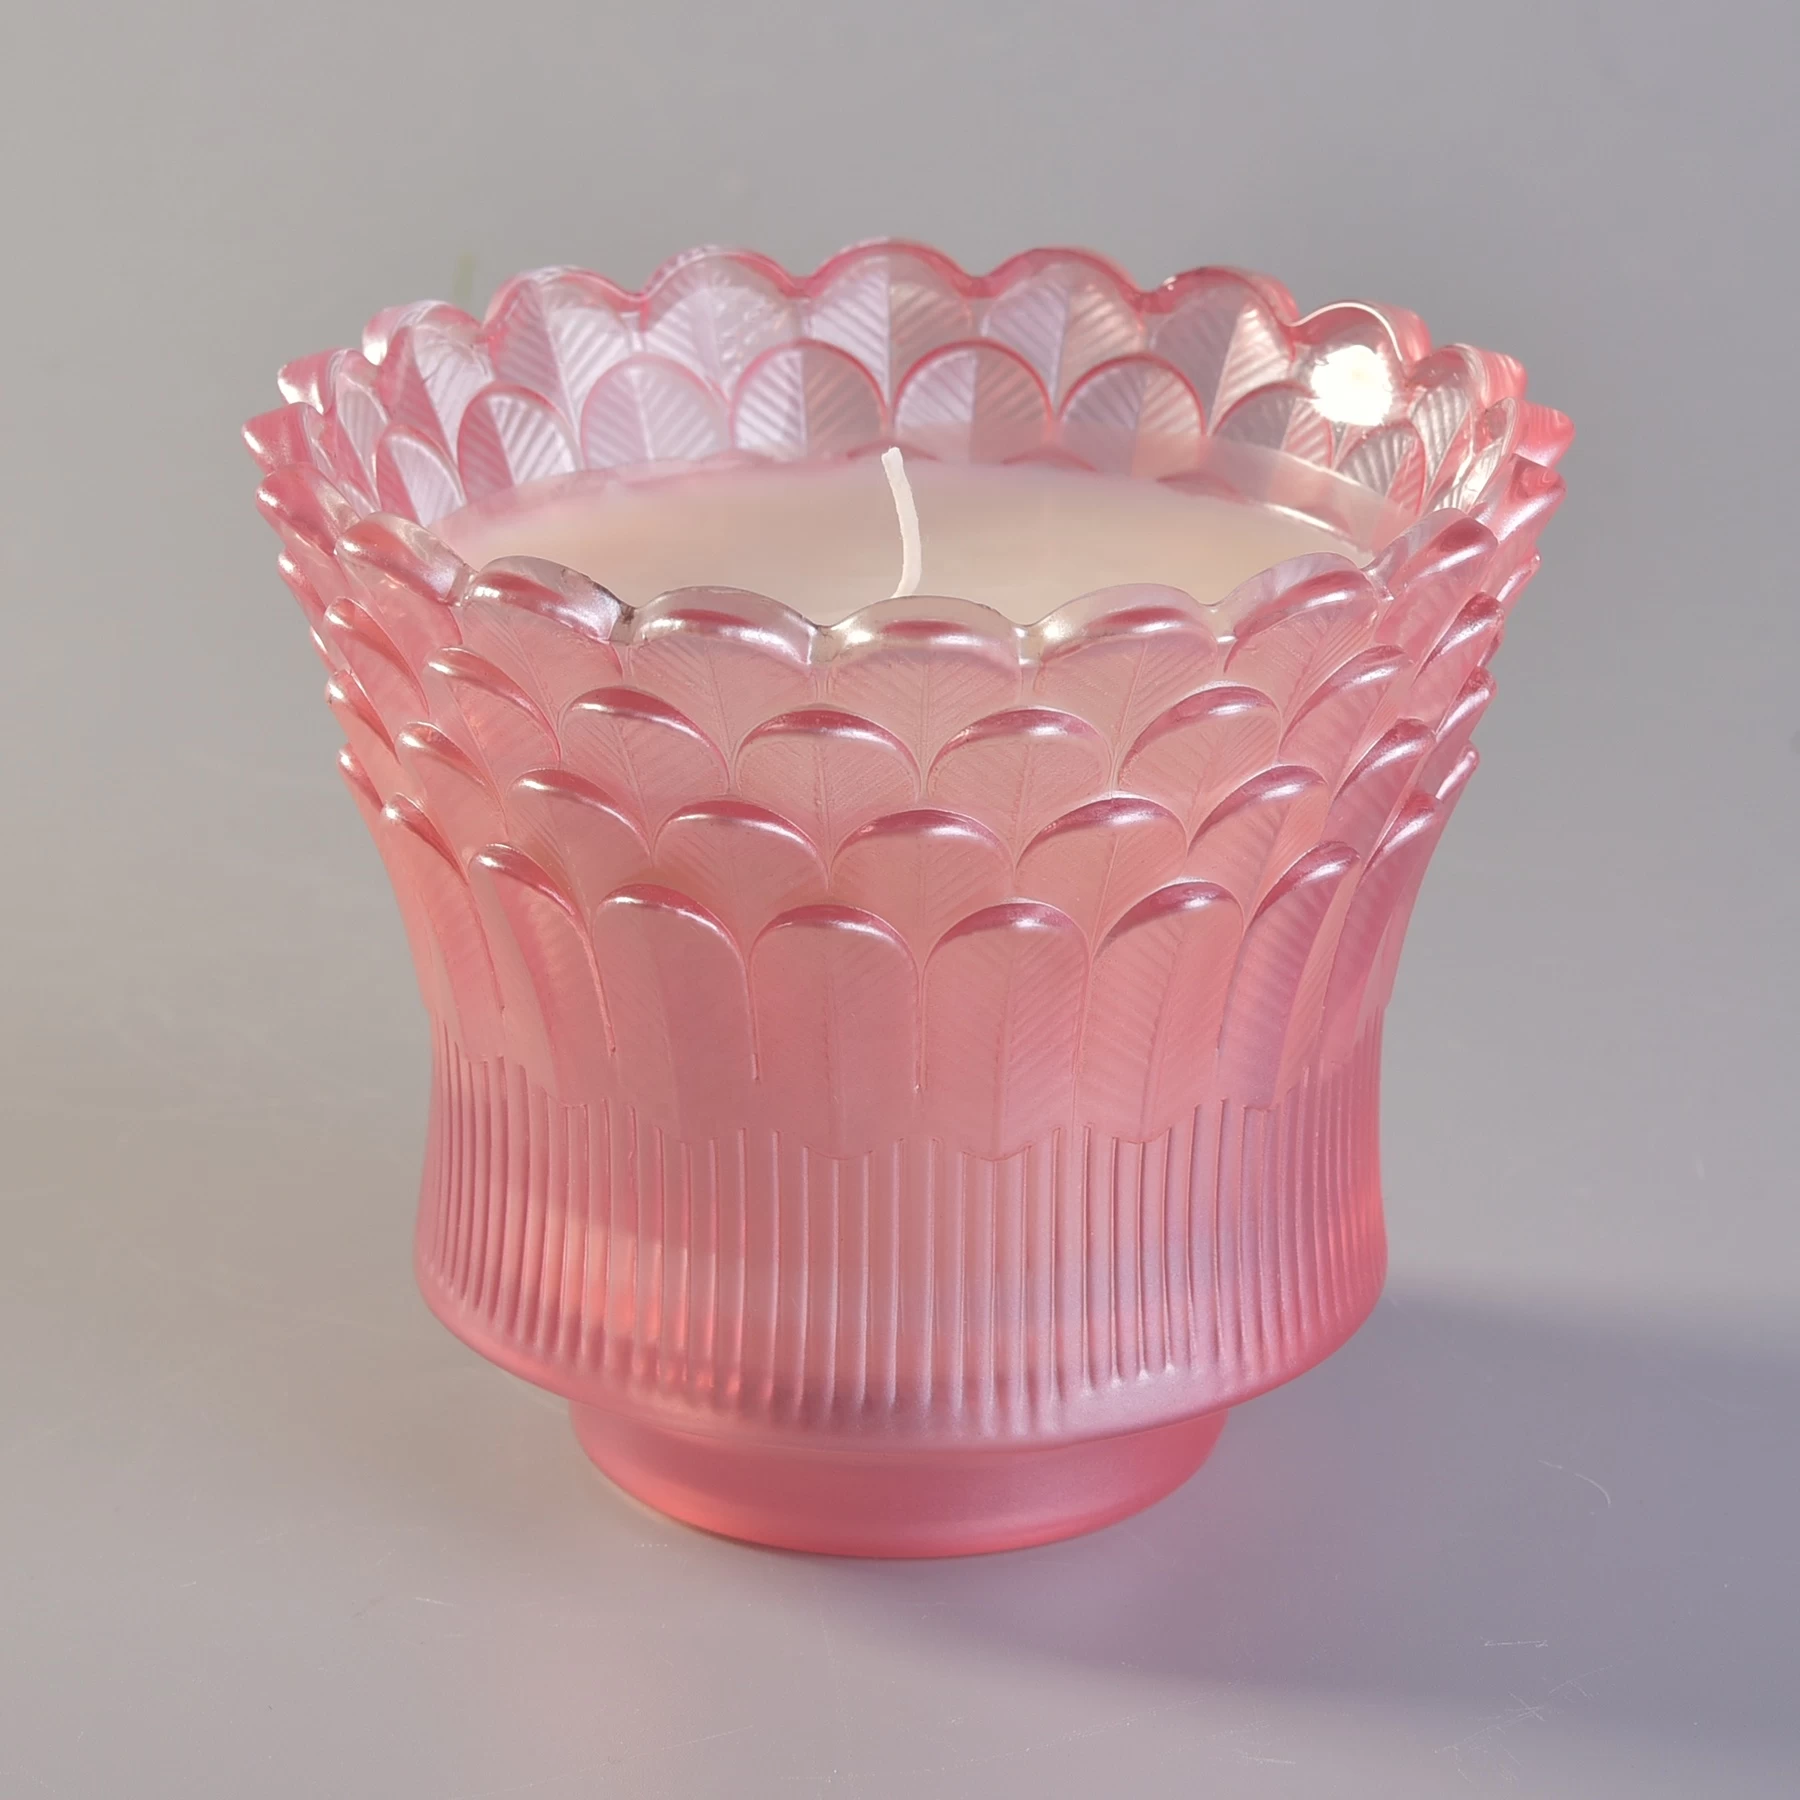 Sunny Luxury feather design glass candle holder